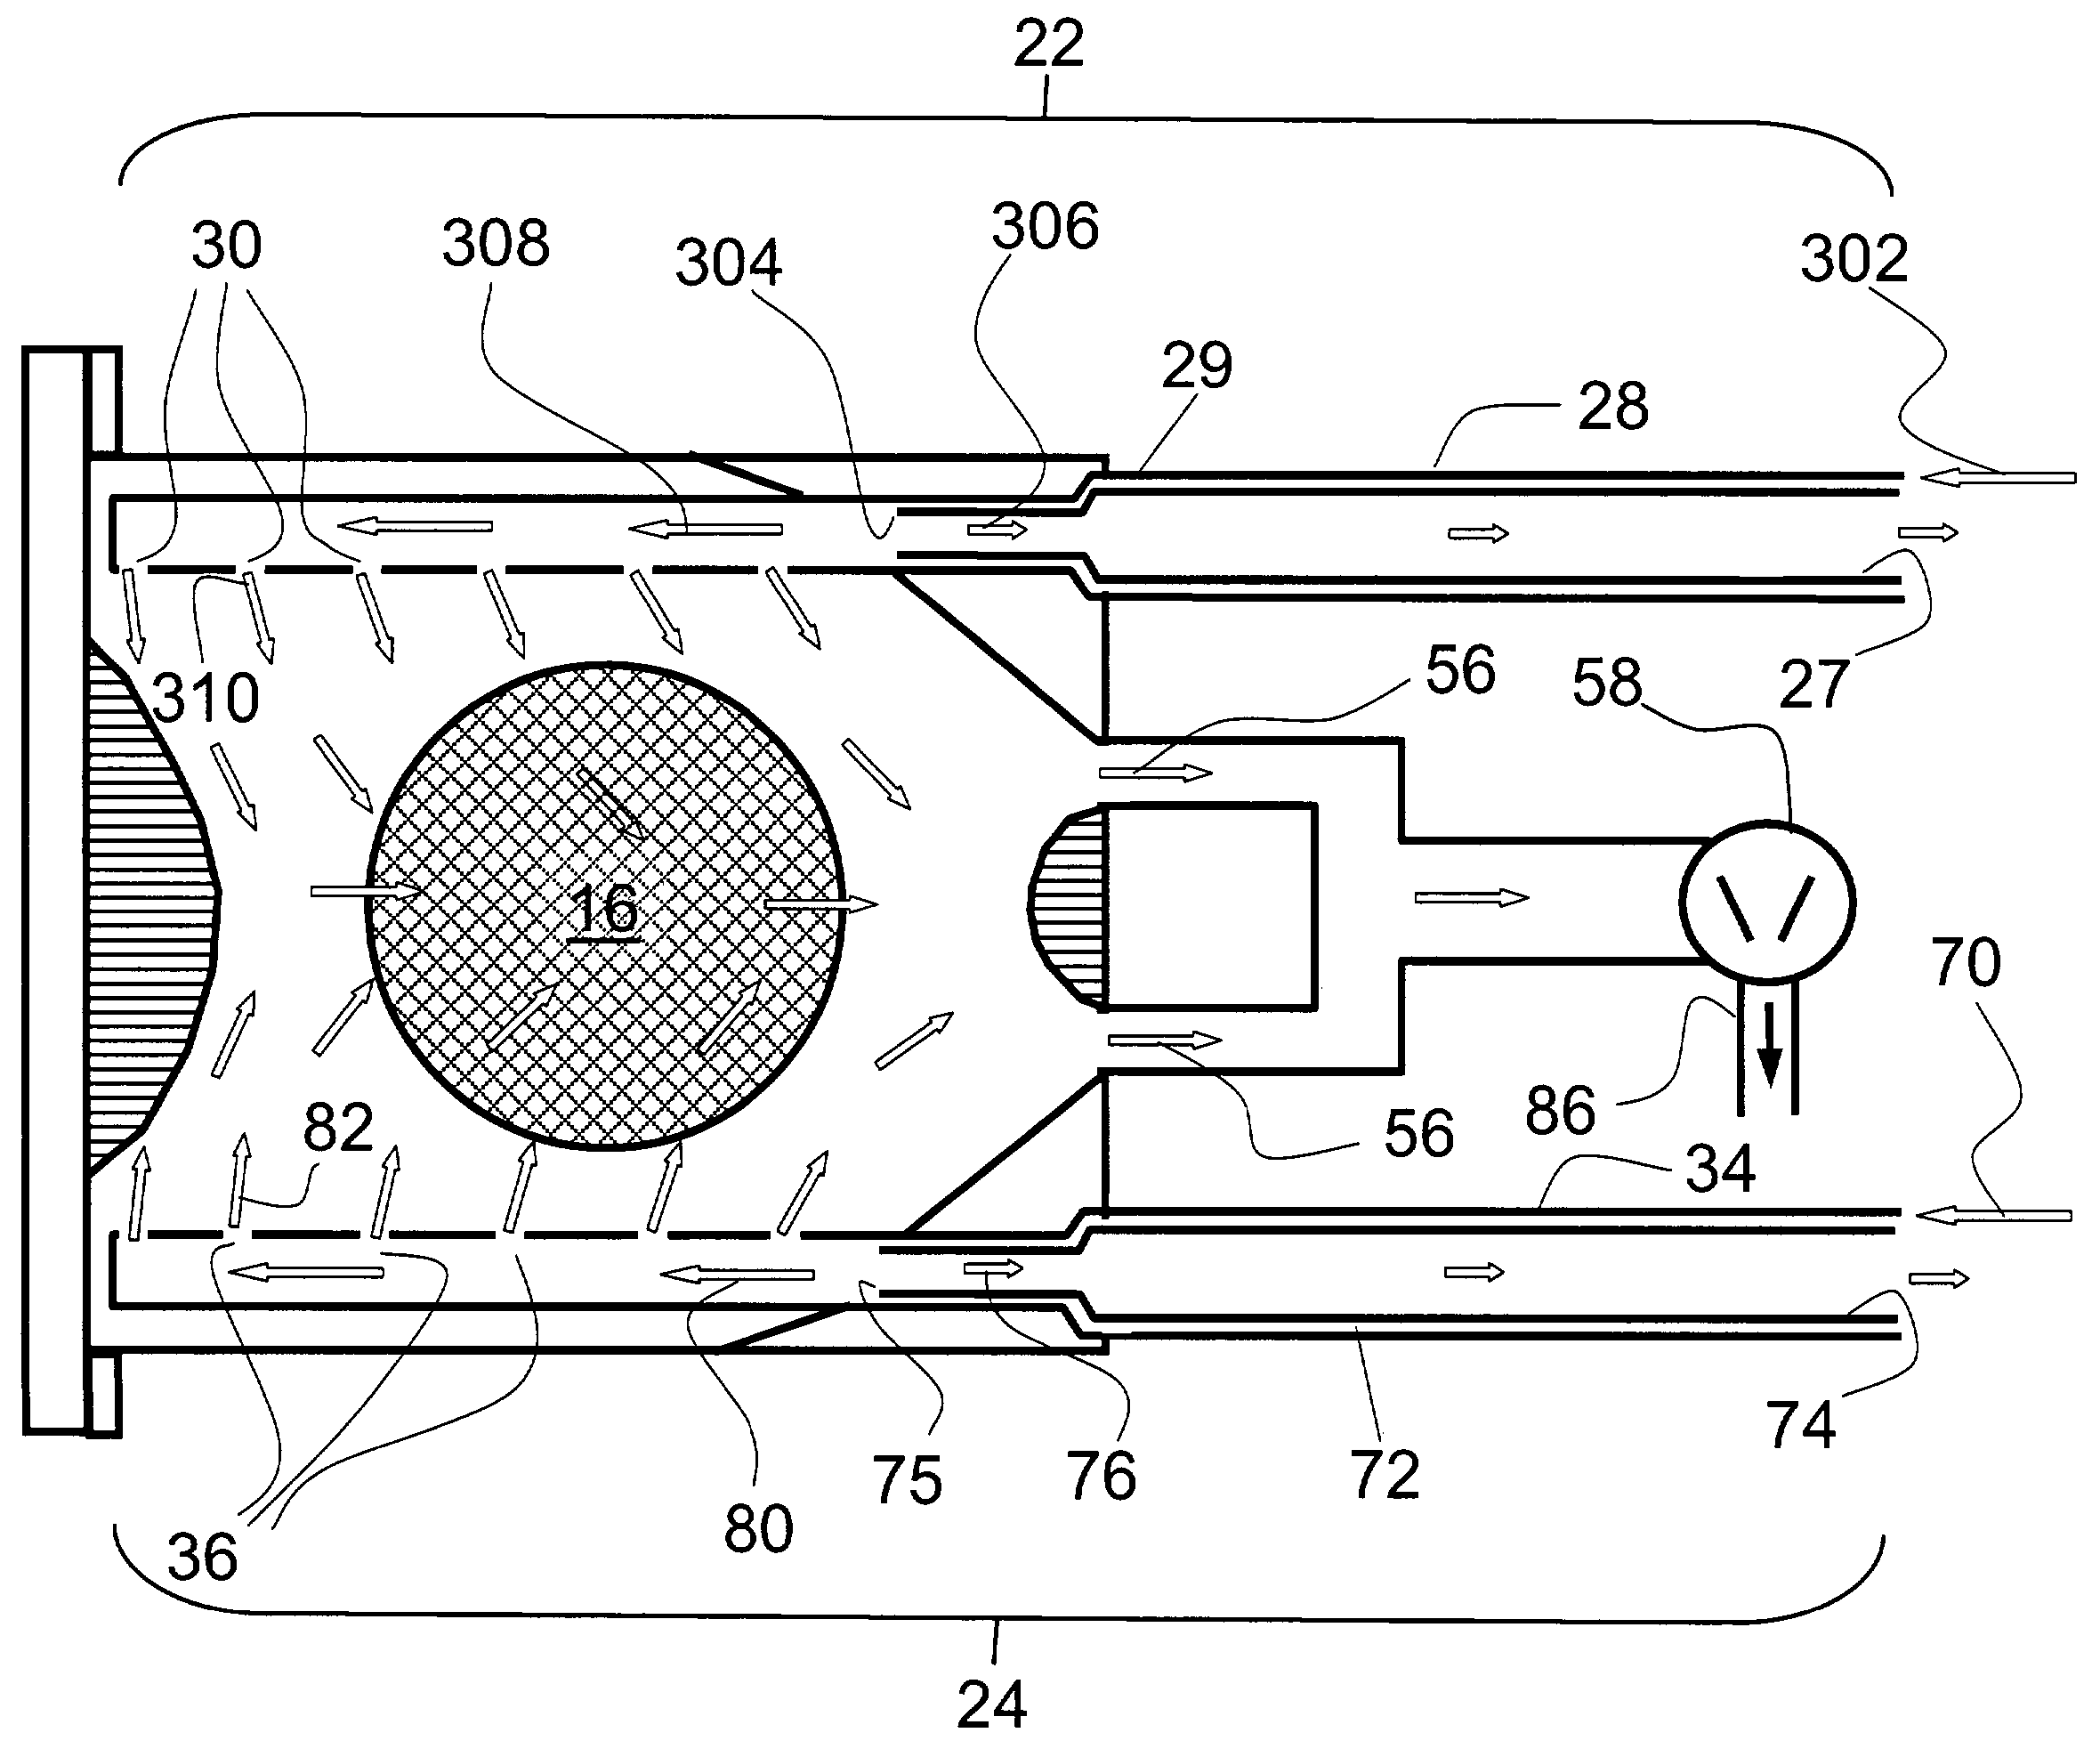 Method and apparatus for depositing thin films on a surface